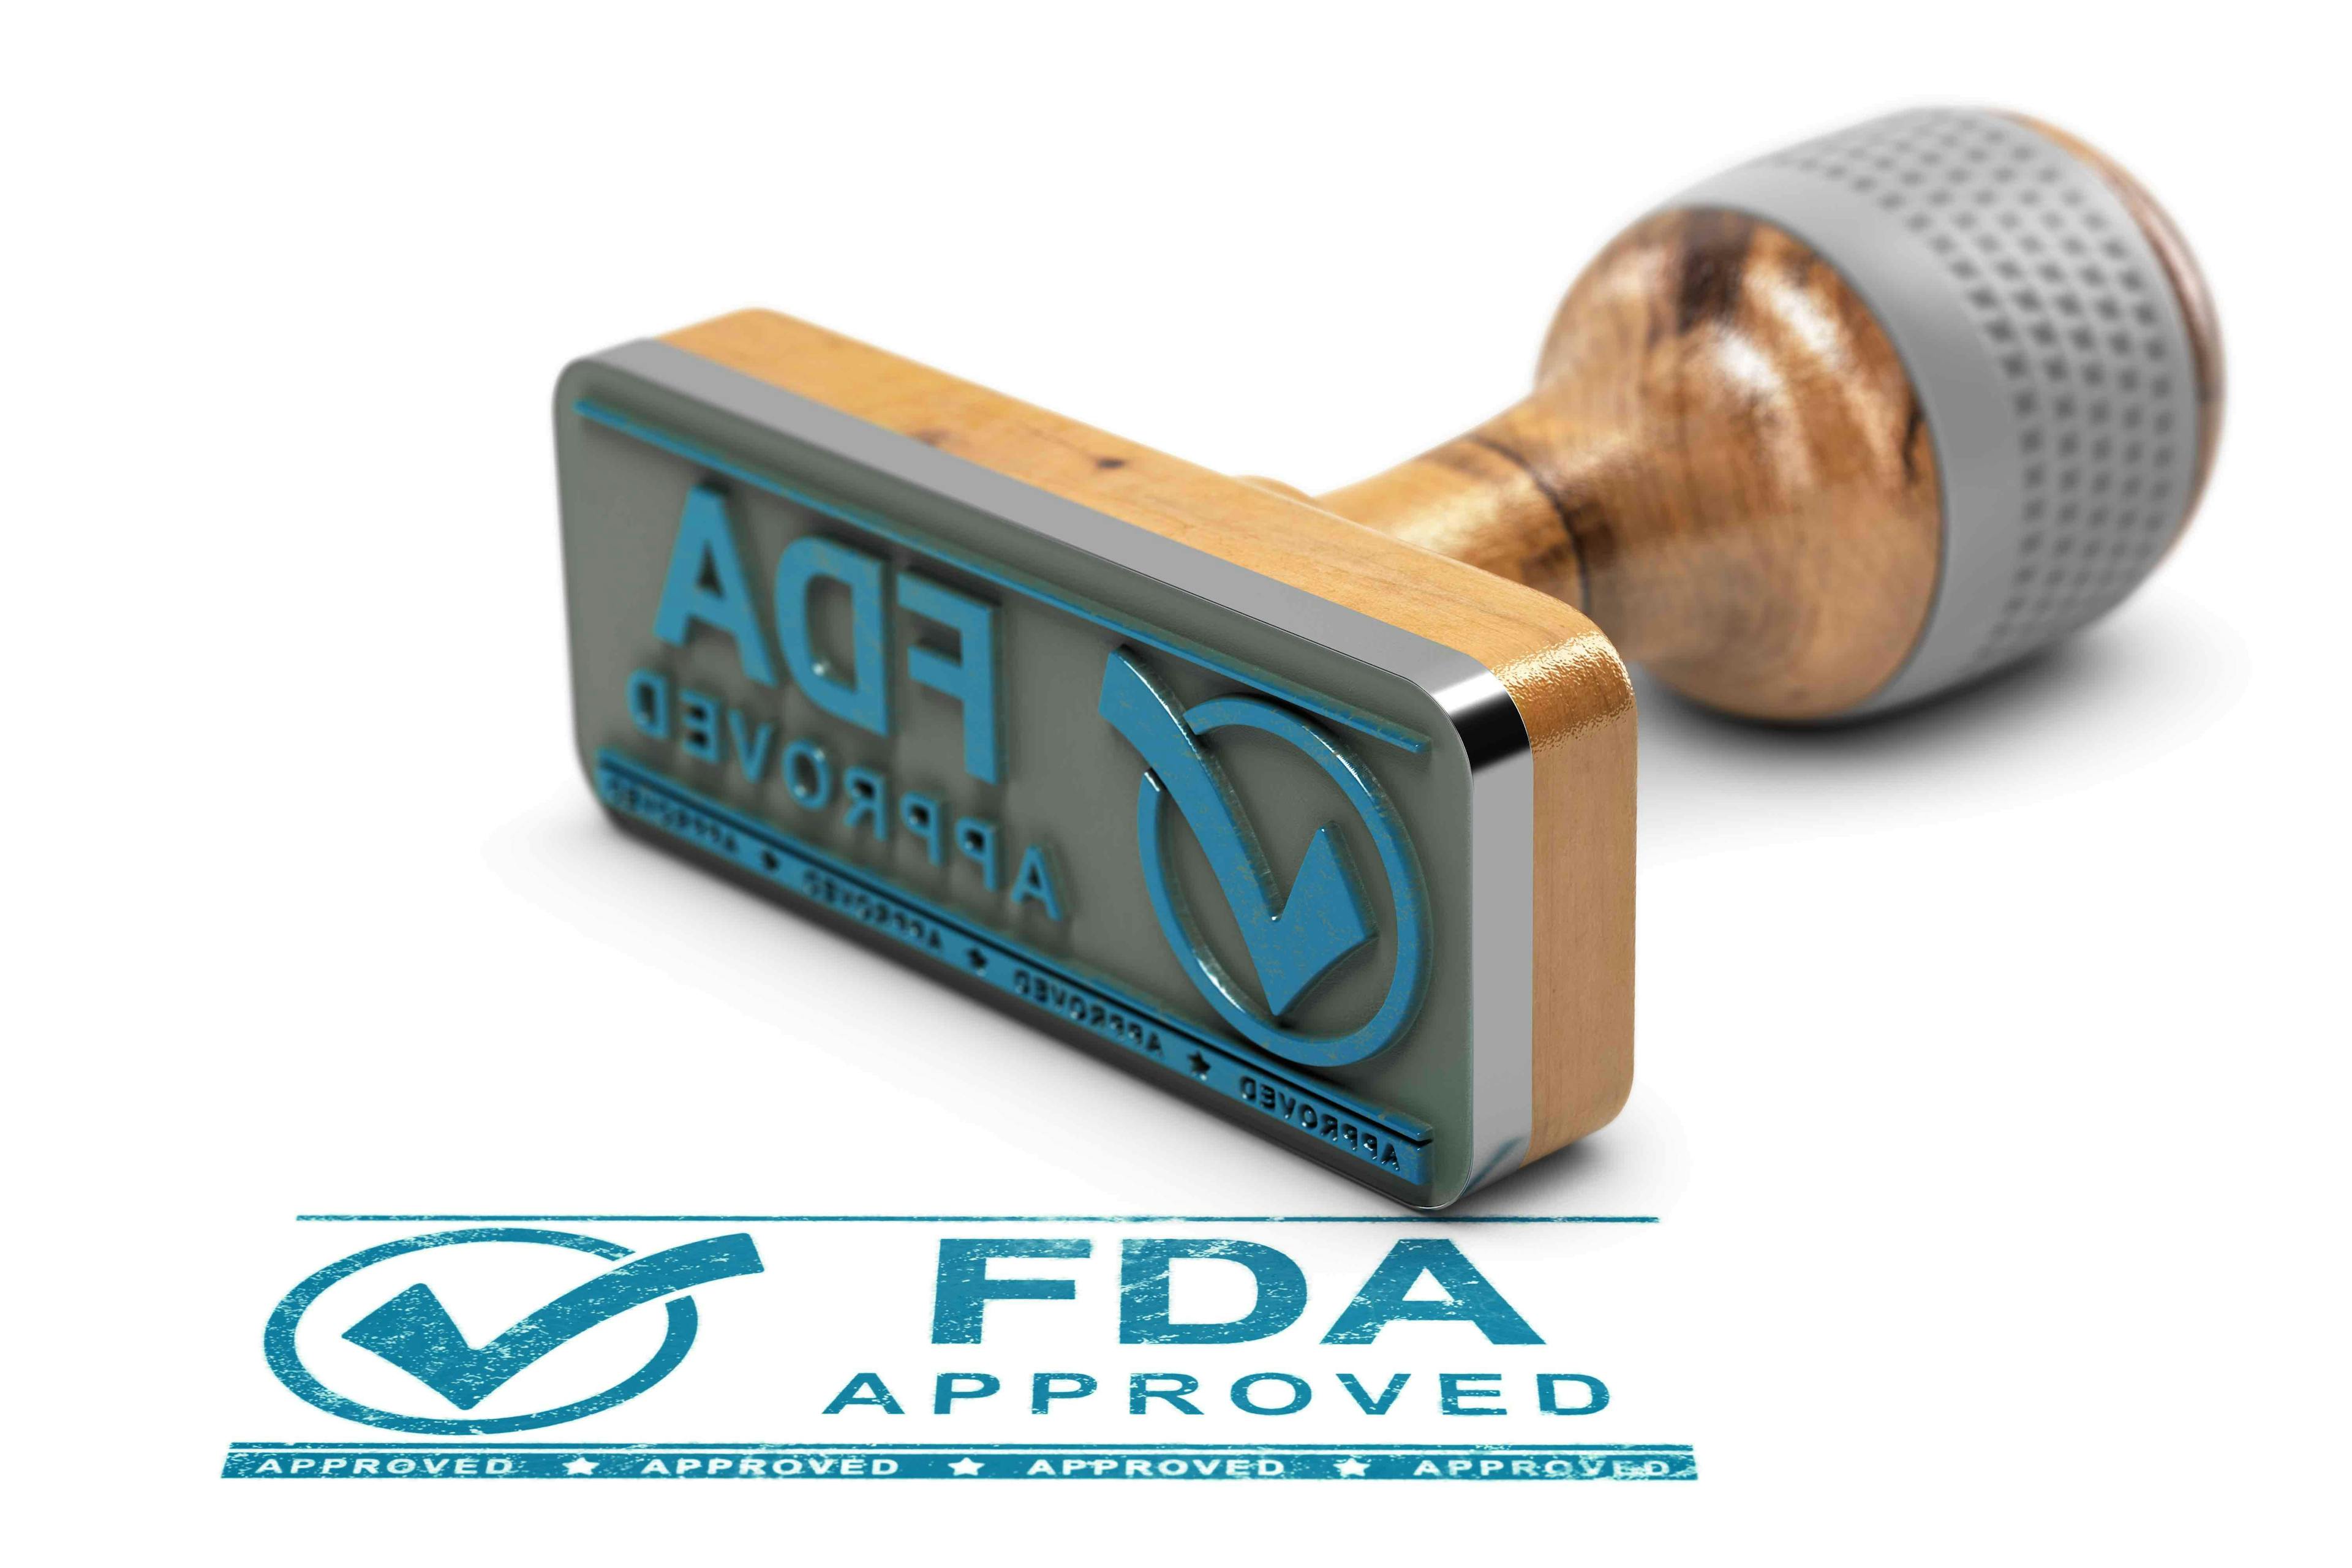 FDA Approved | Image credit: Olivier Le Moal - stock.adobe.com